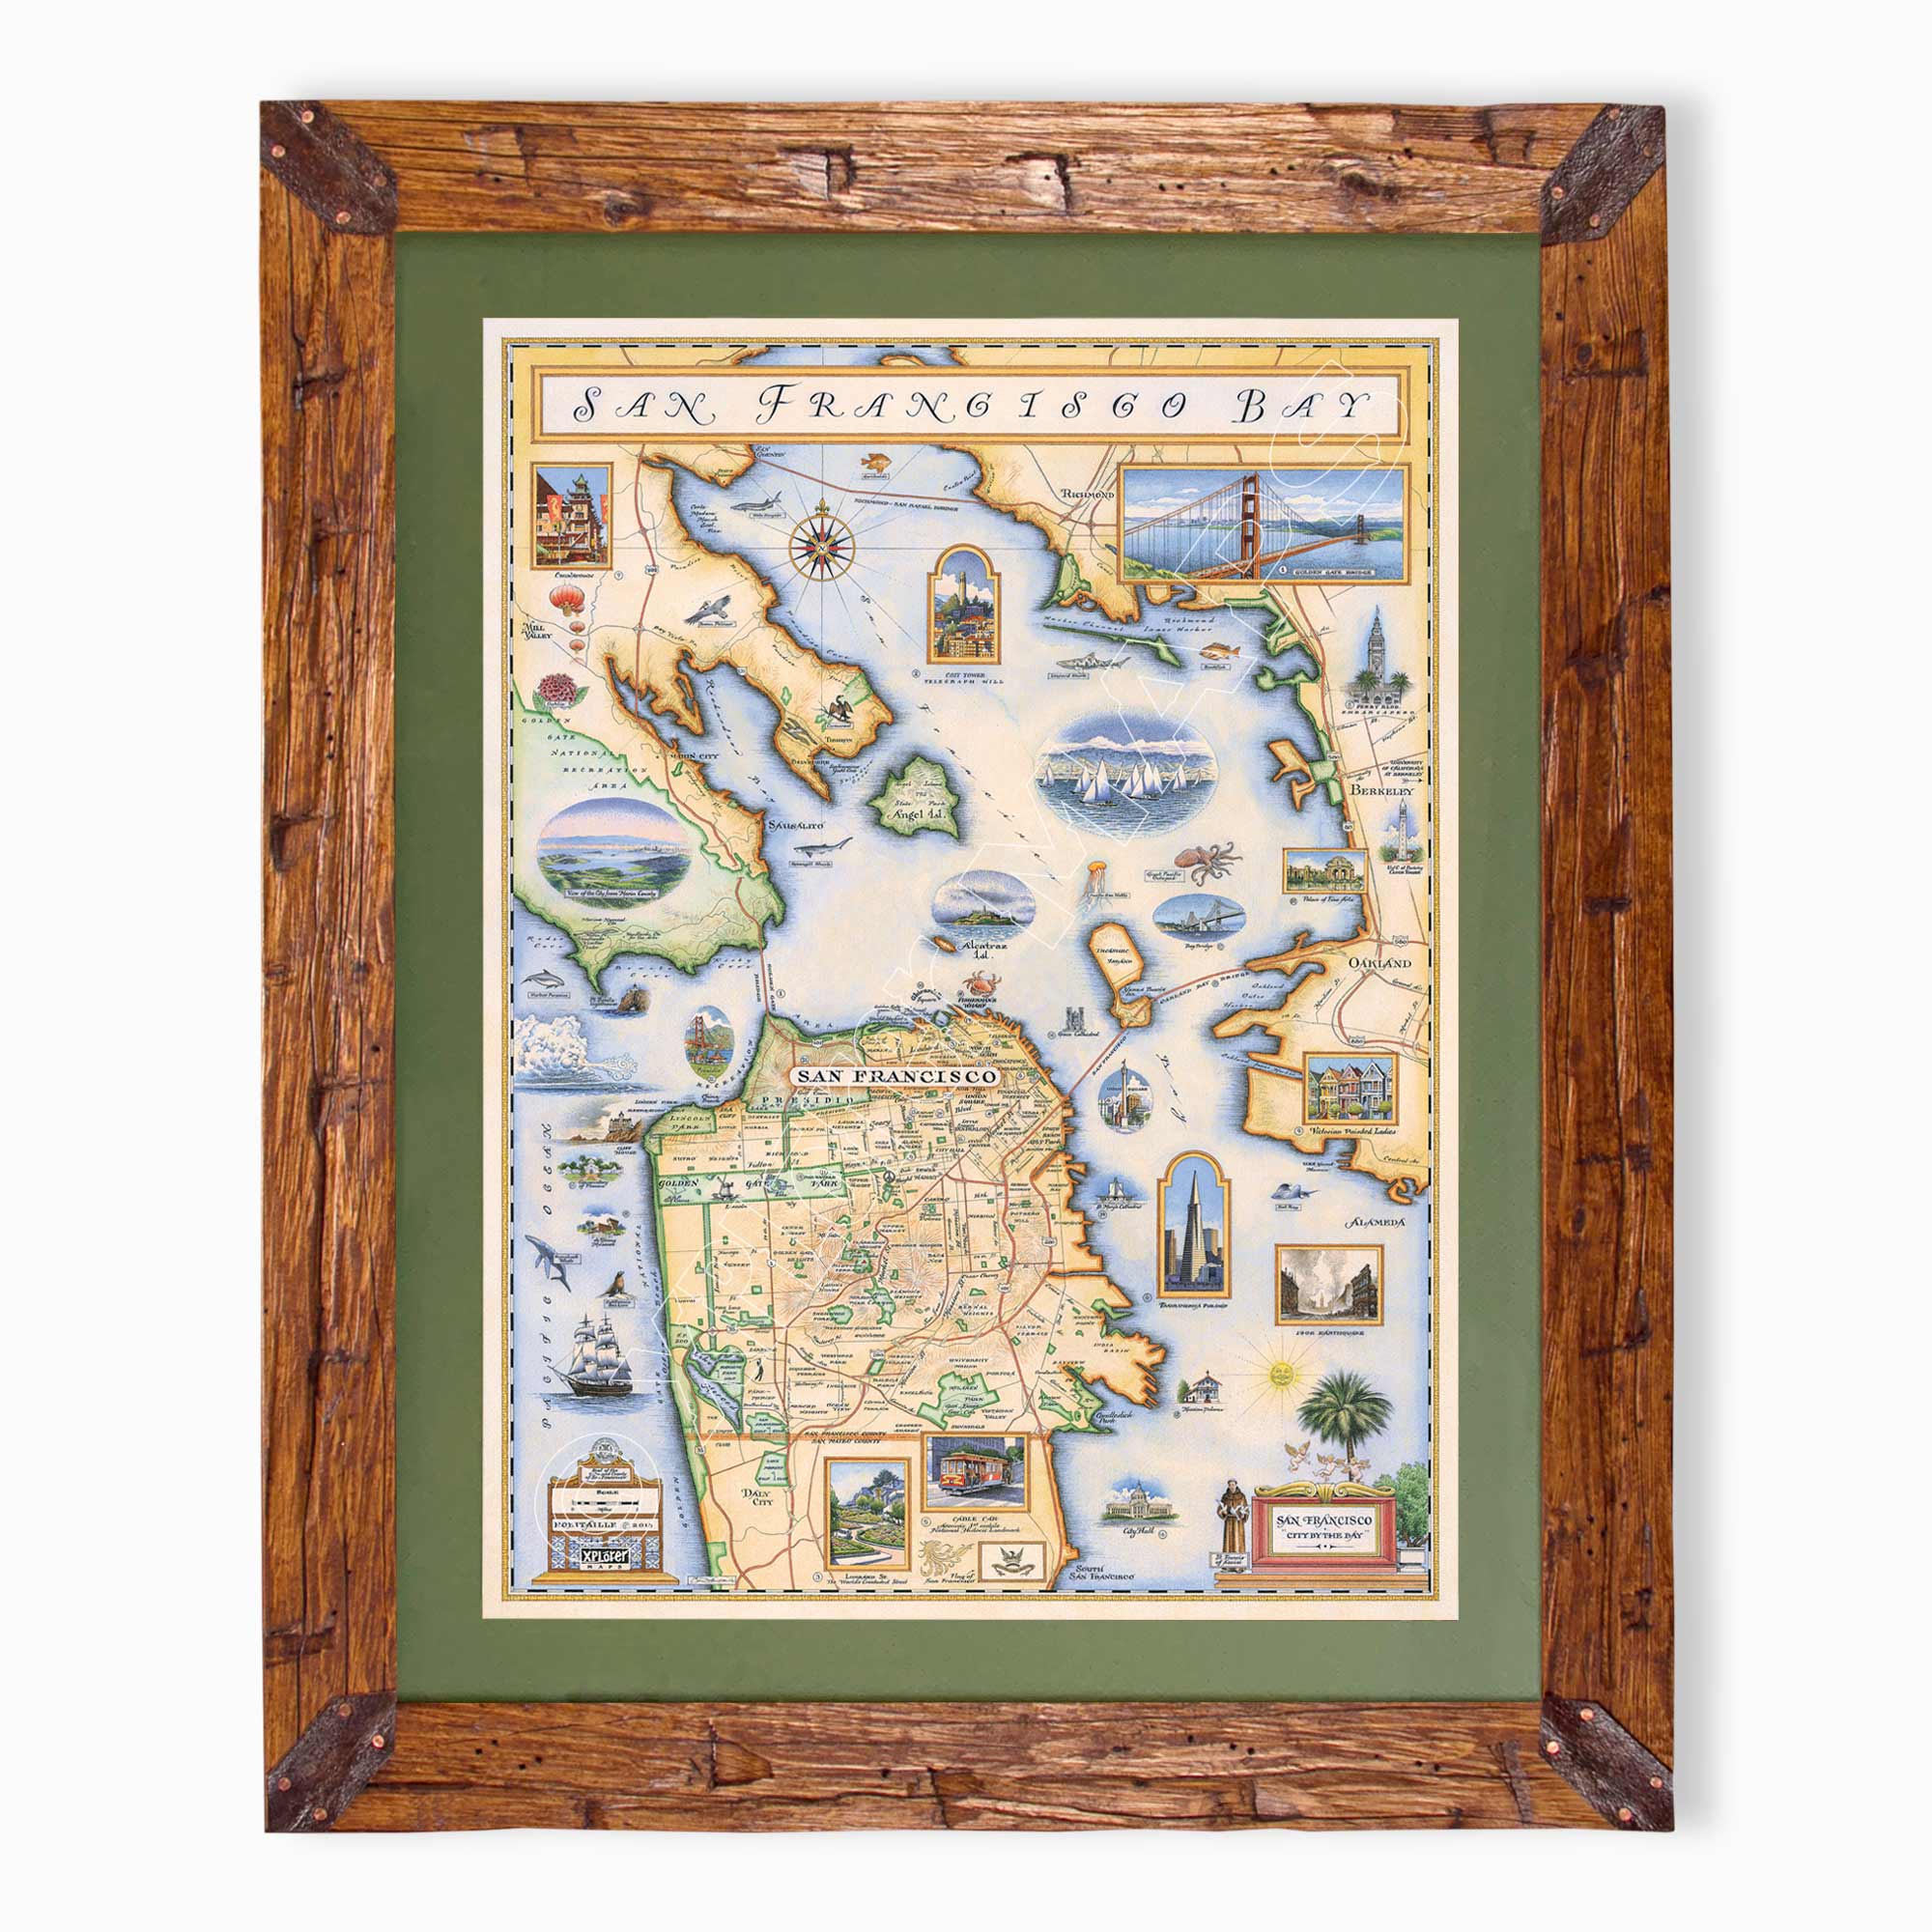 San Francisco Bay hand-drawn map in earth tones blues and greens. The map print is framed in Montana hand-scraped pine with a green mat.